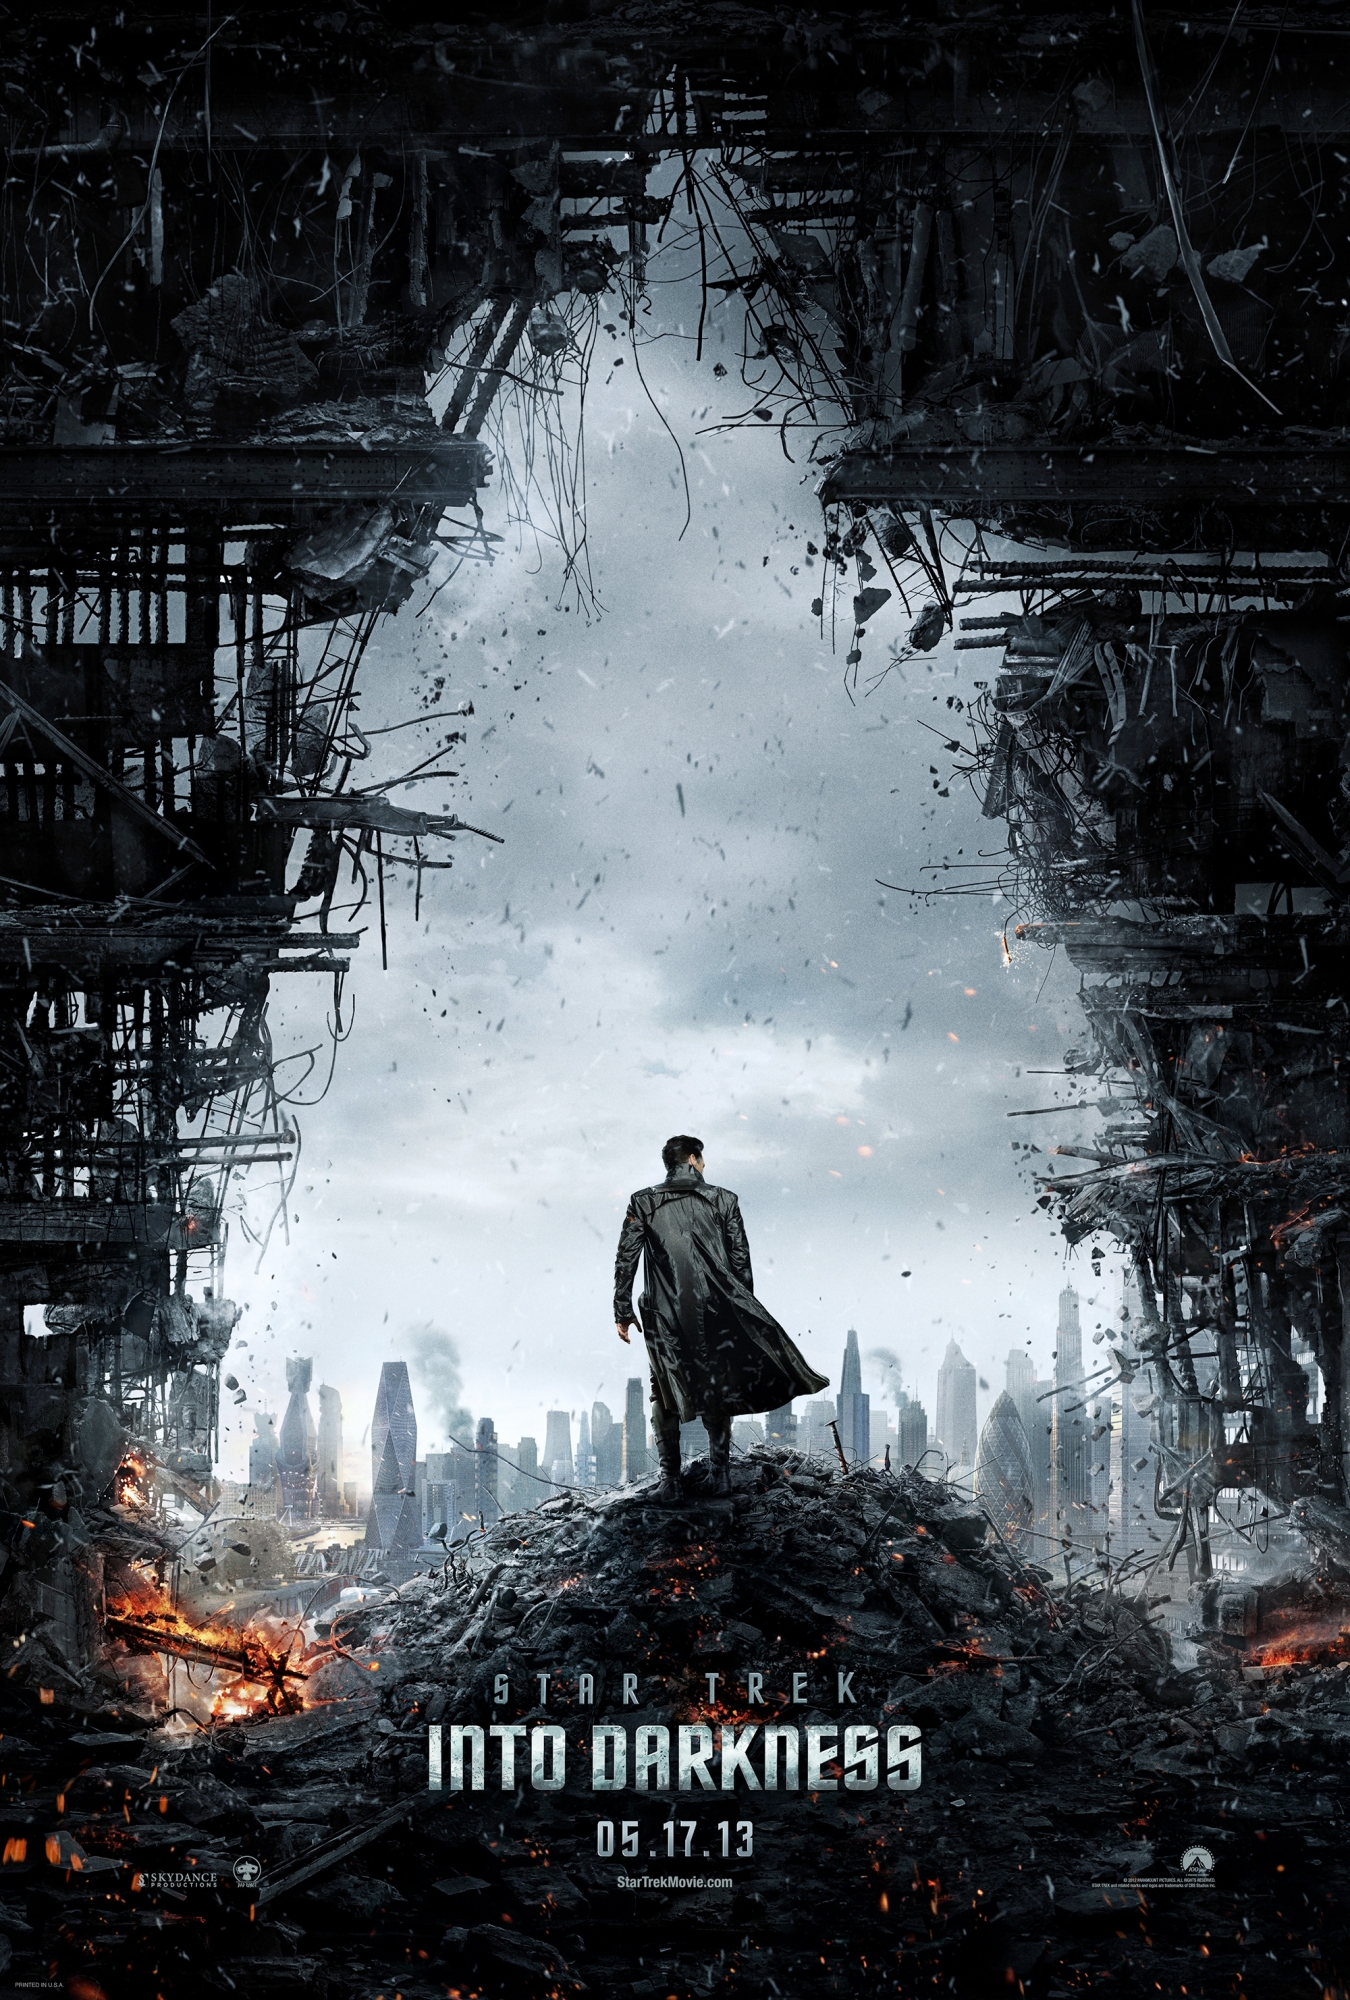 Star Trek Into Darkness Backgrounds, Compatible - PC, Mobile, Gadgets| 1350x2000 px